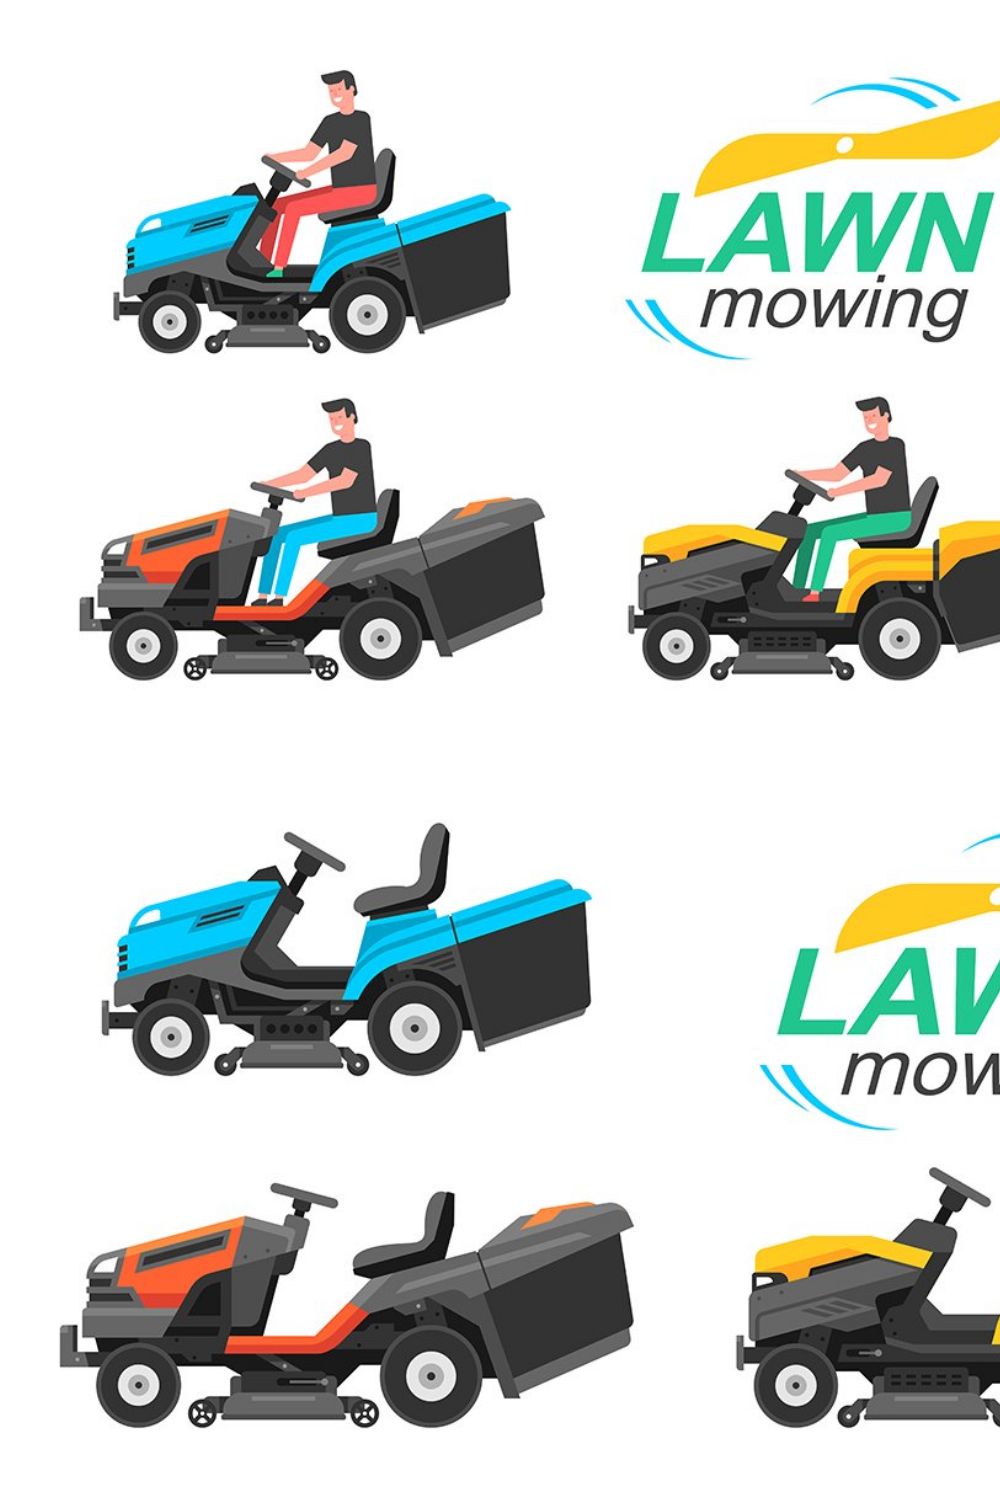 Tractor lawn mower pinterest preview image.